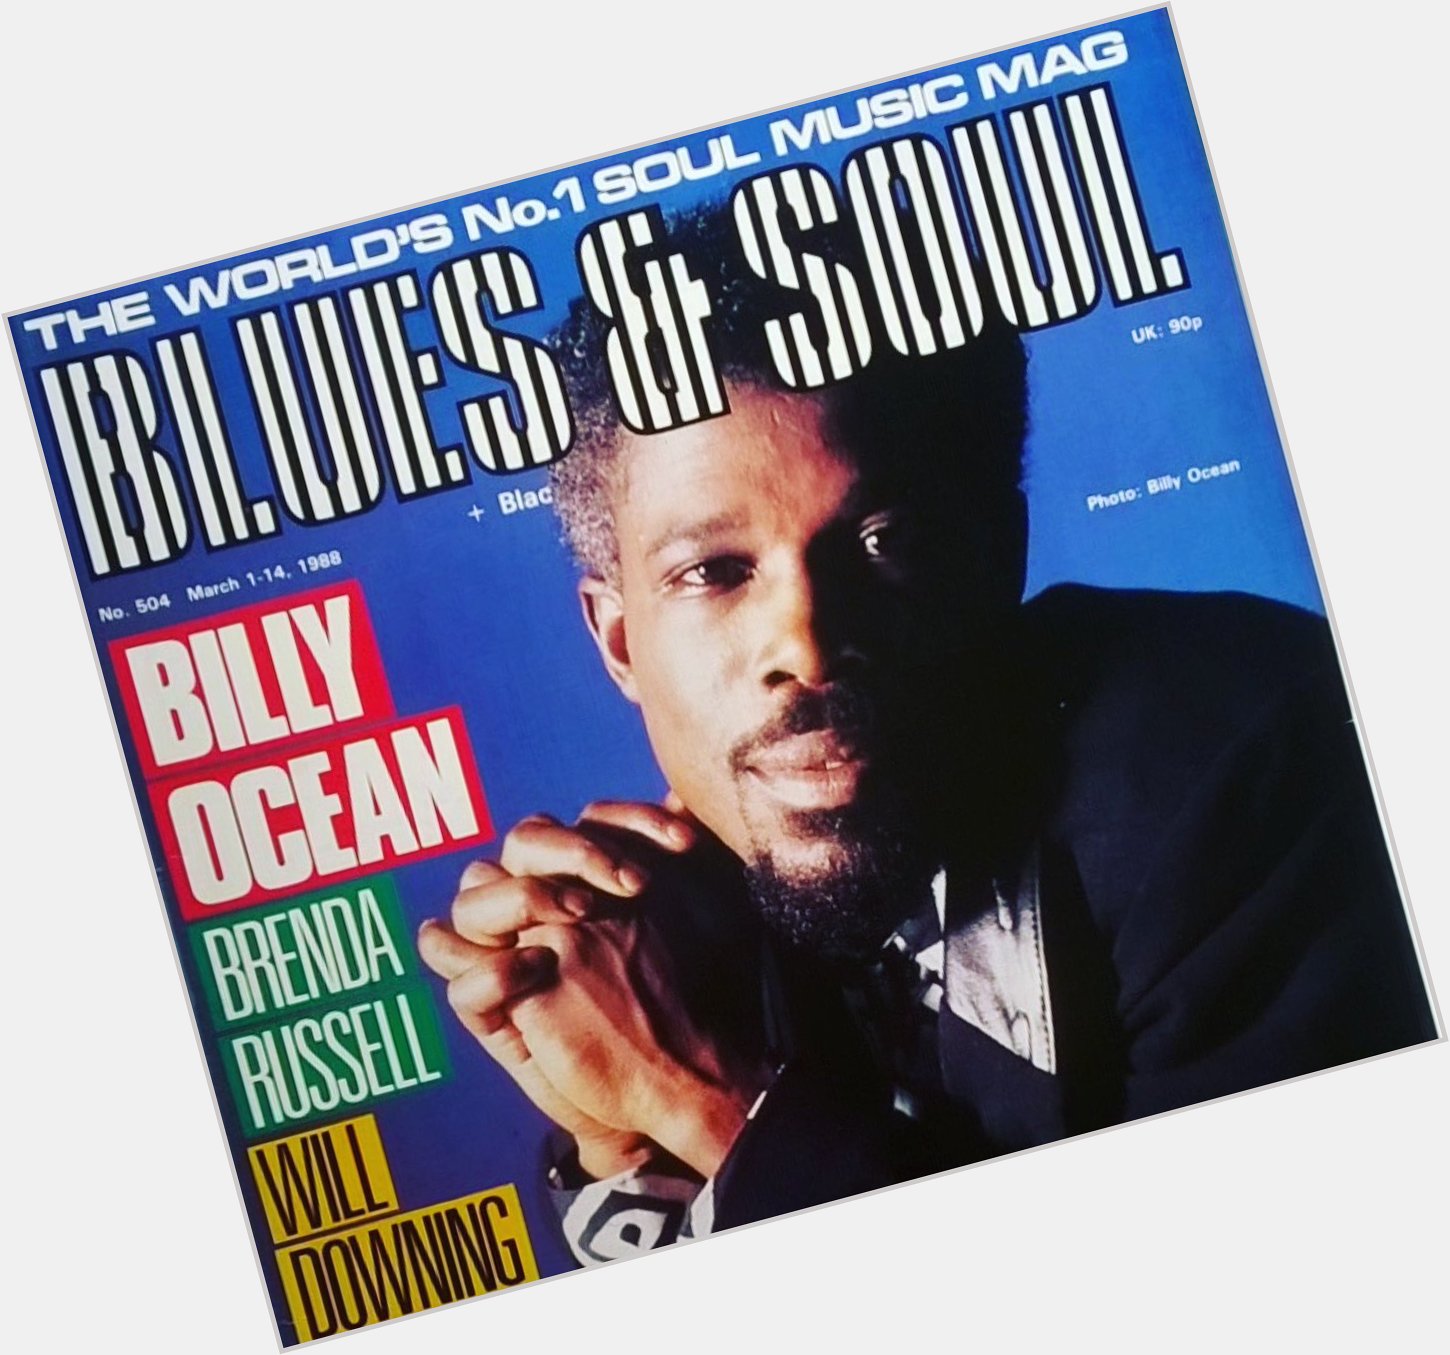 Happy Birthday Soul music icon Billy Ocean  This cover is from 1 Mar 1988    